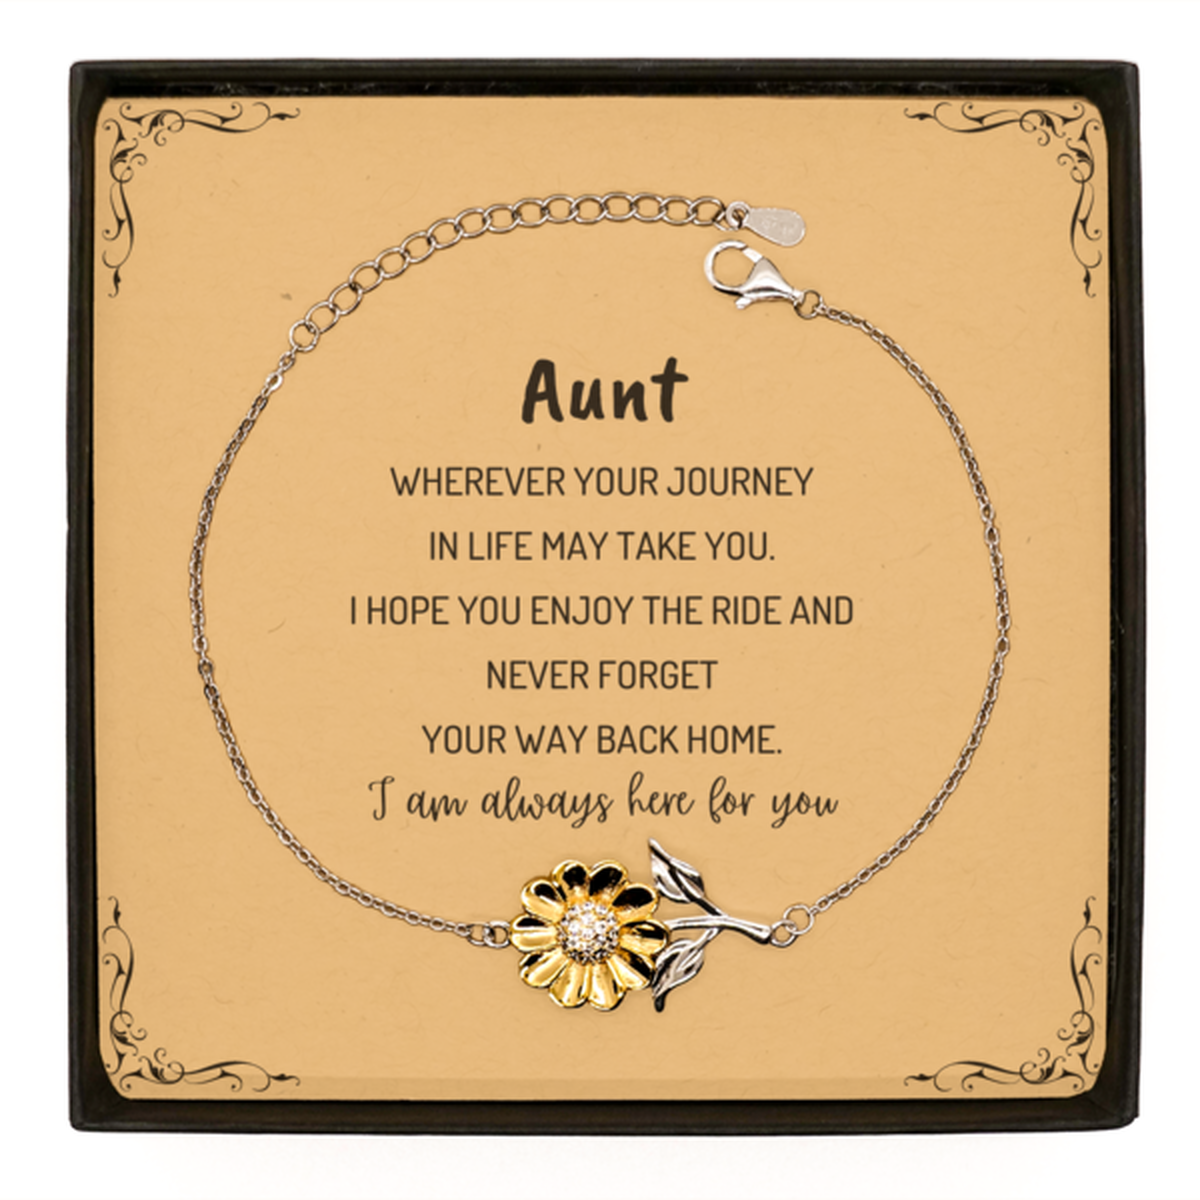 Aunt wherever your journey in life may take you, I am always here for you Aunt Sunflower Bracelet, Awesome Christmas Gifts For Aunt Message Card, Aunt Birthday Gifts for Men Women Family Loved One